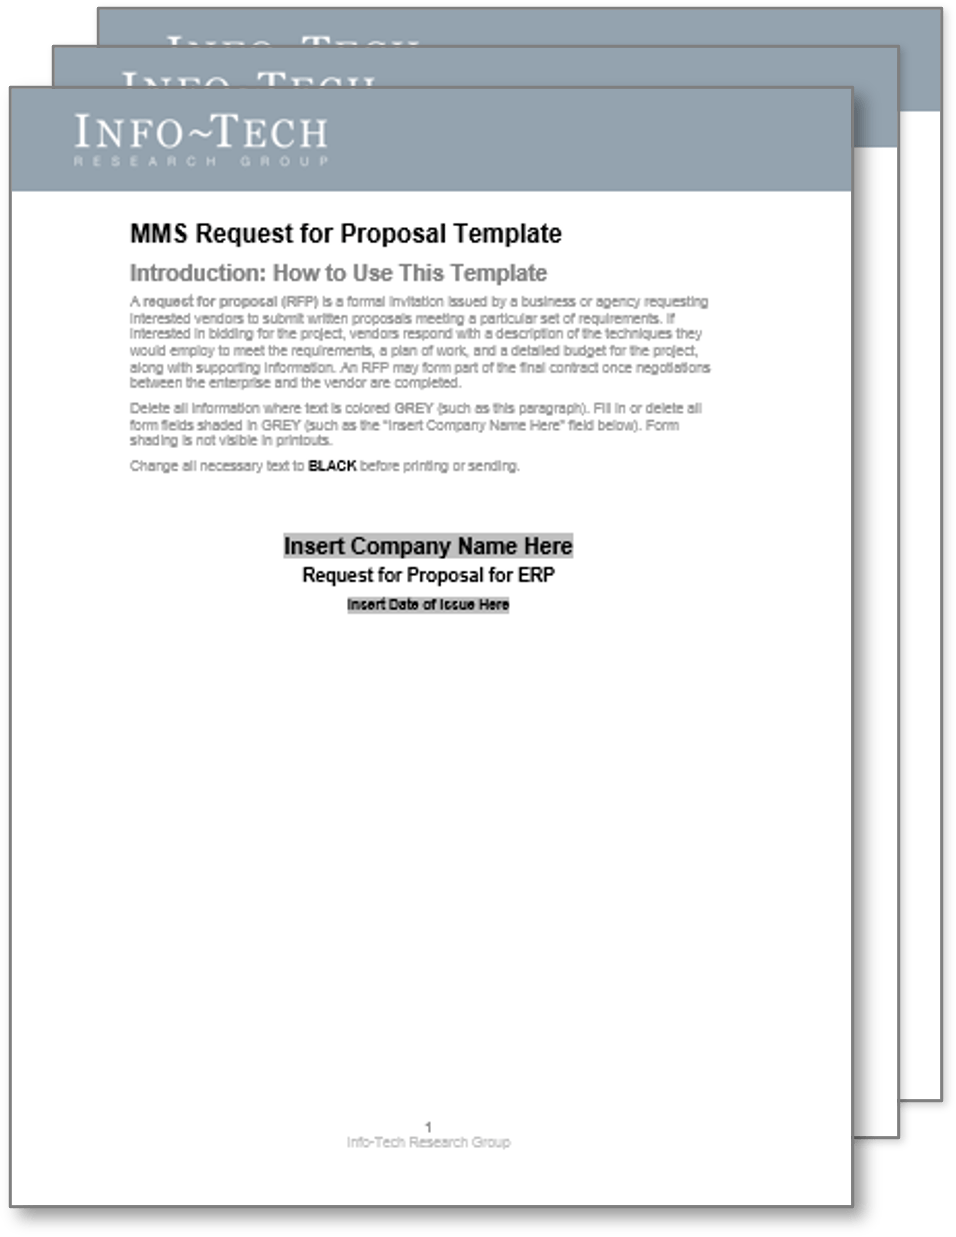 Sample of Info-Tech's MMS Request Proposal Template.